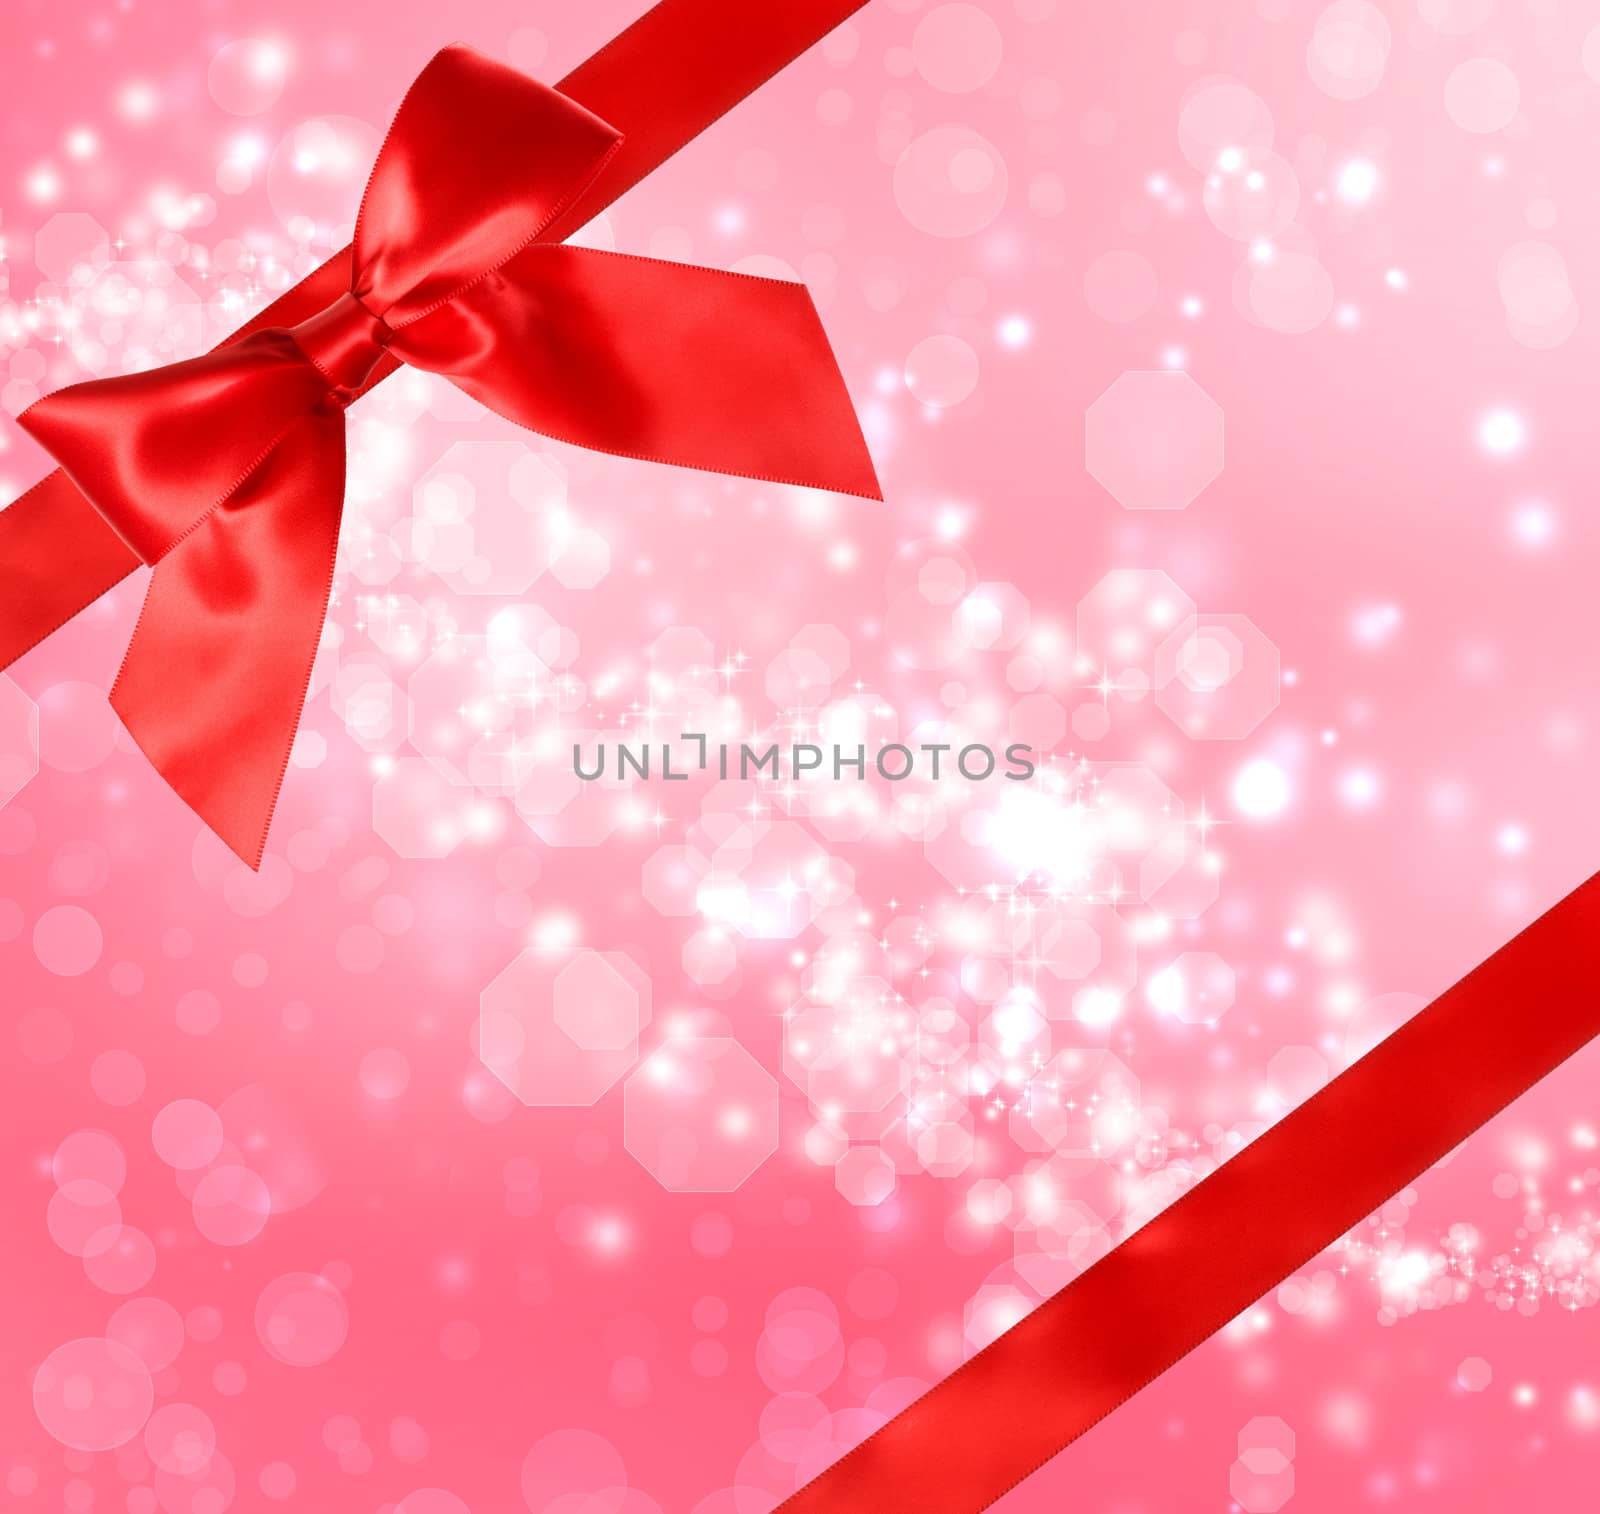 Red Bow and Ribbon with Abstract Lights by melpomene